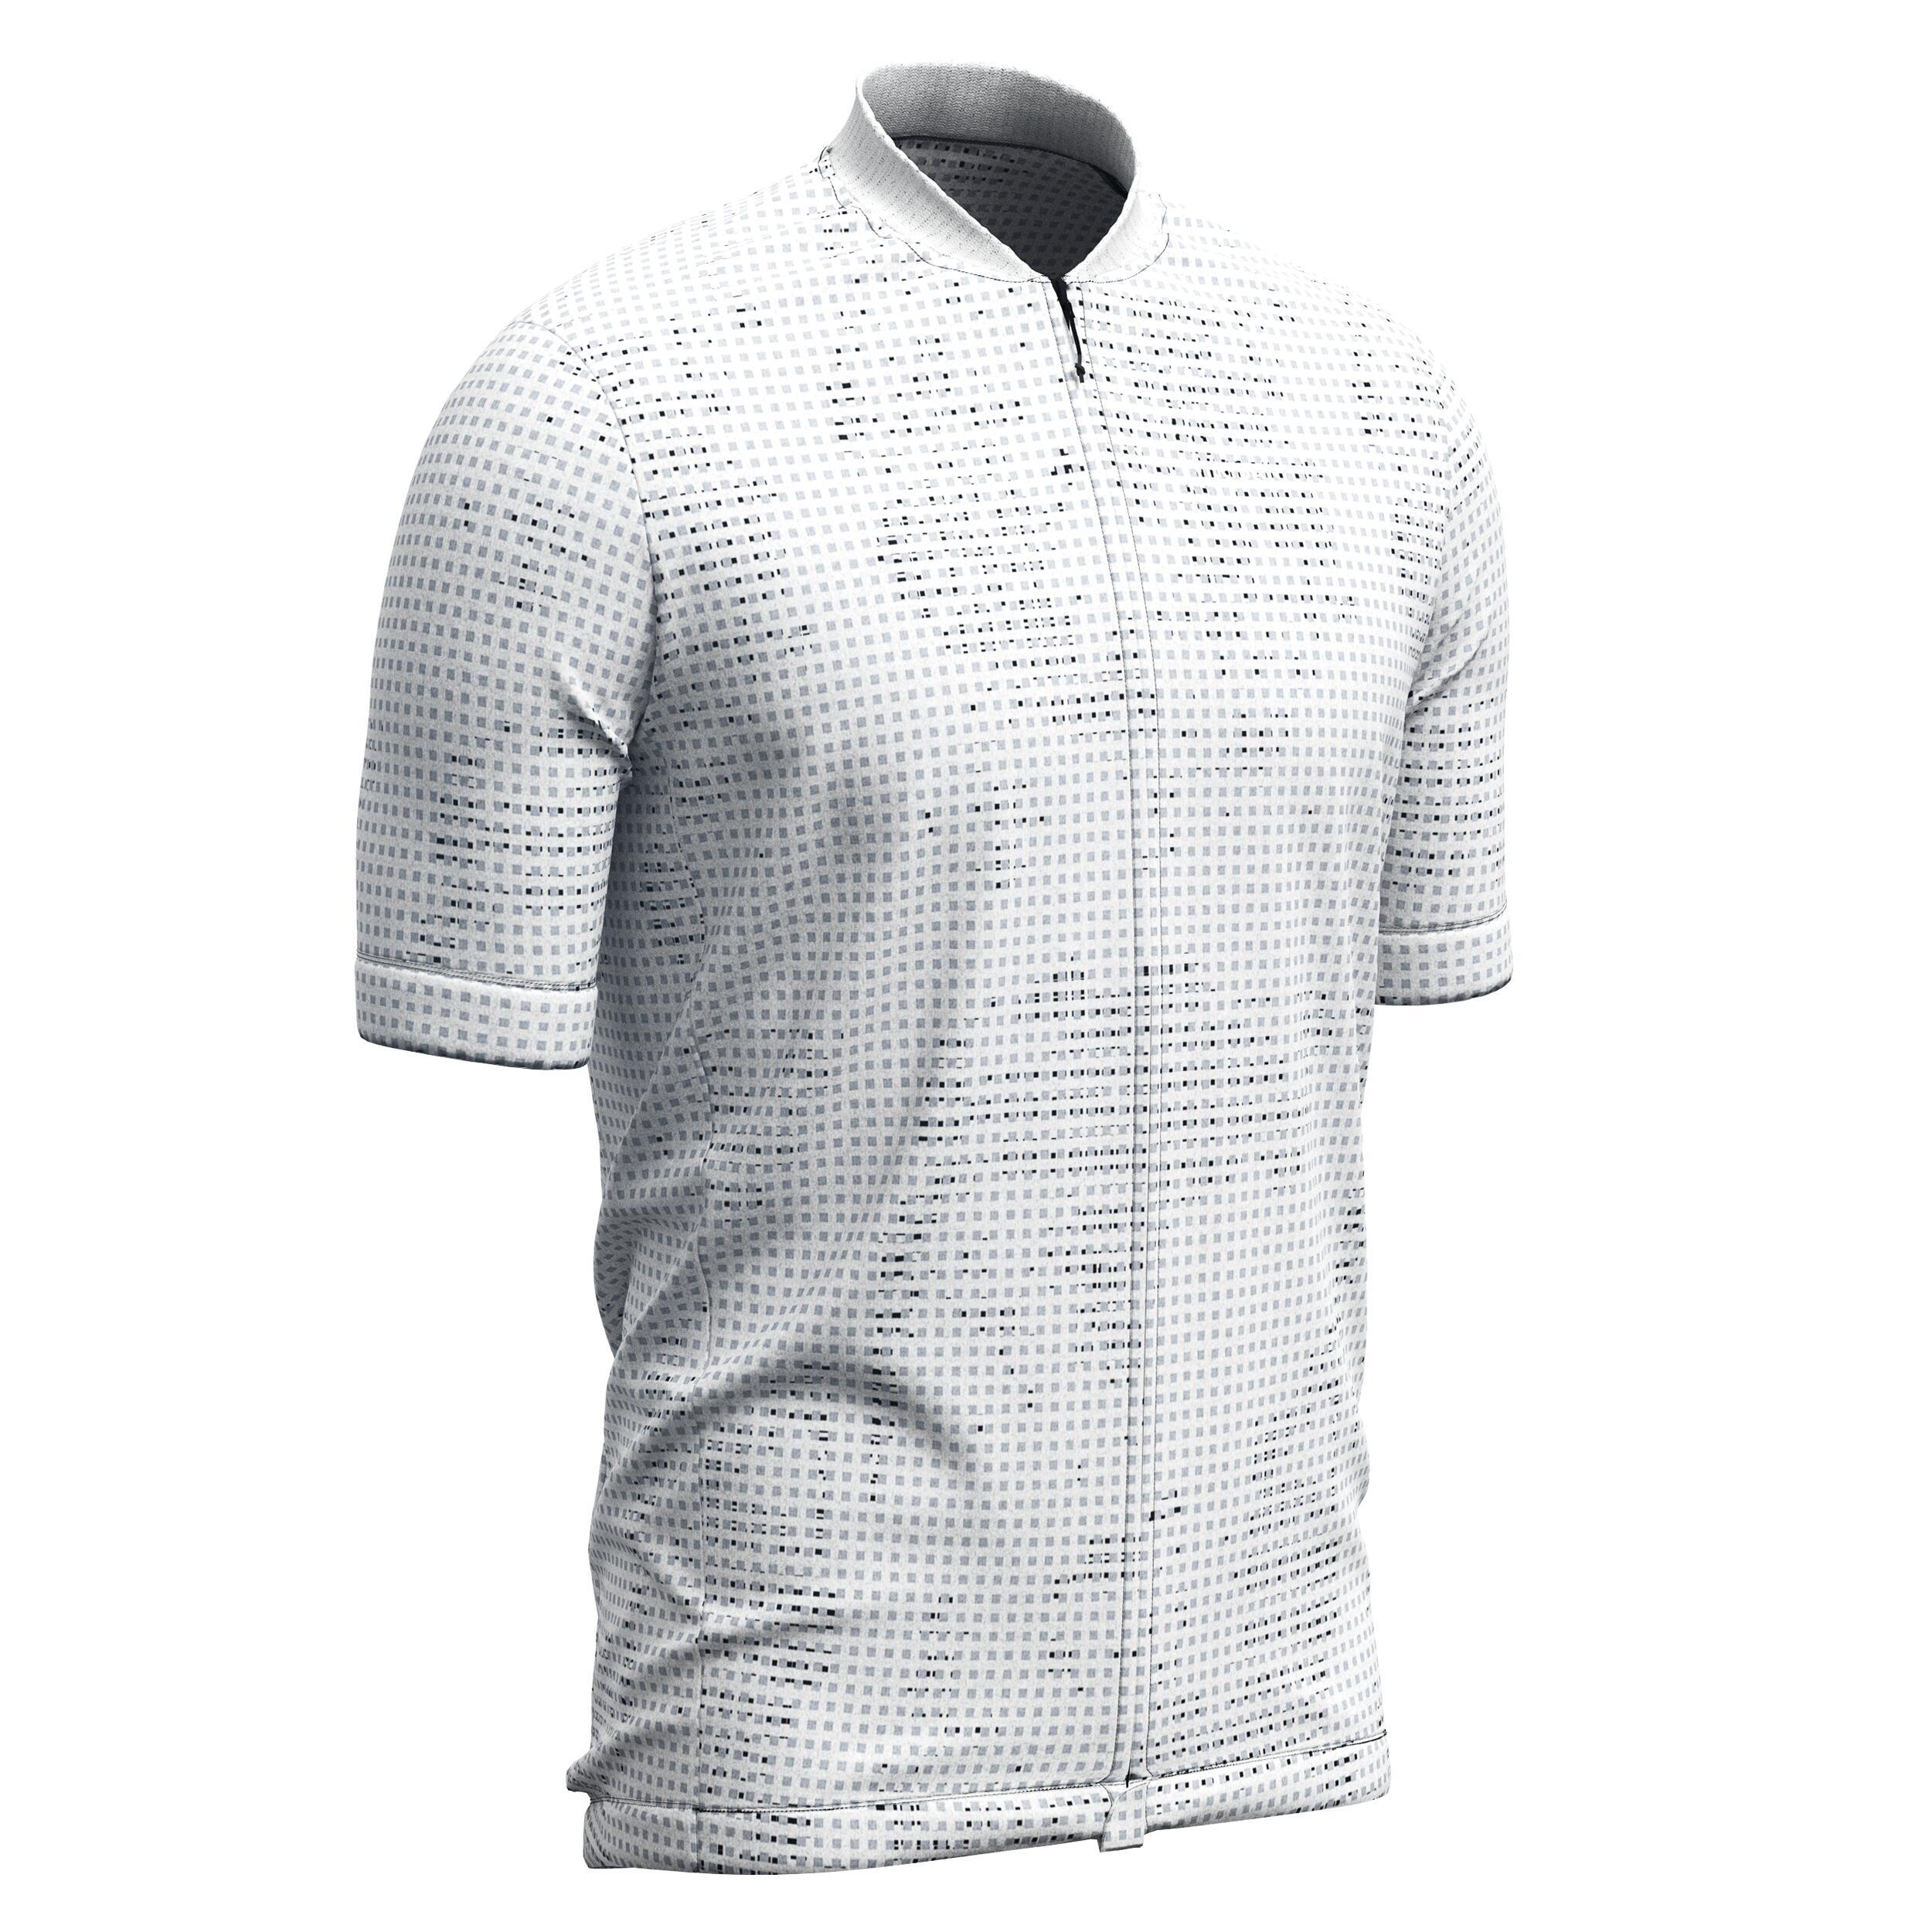 TRIBAN Men's Short-Sleeved Road Cycling Summer Jersey RC100 - White